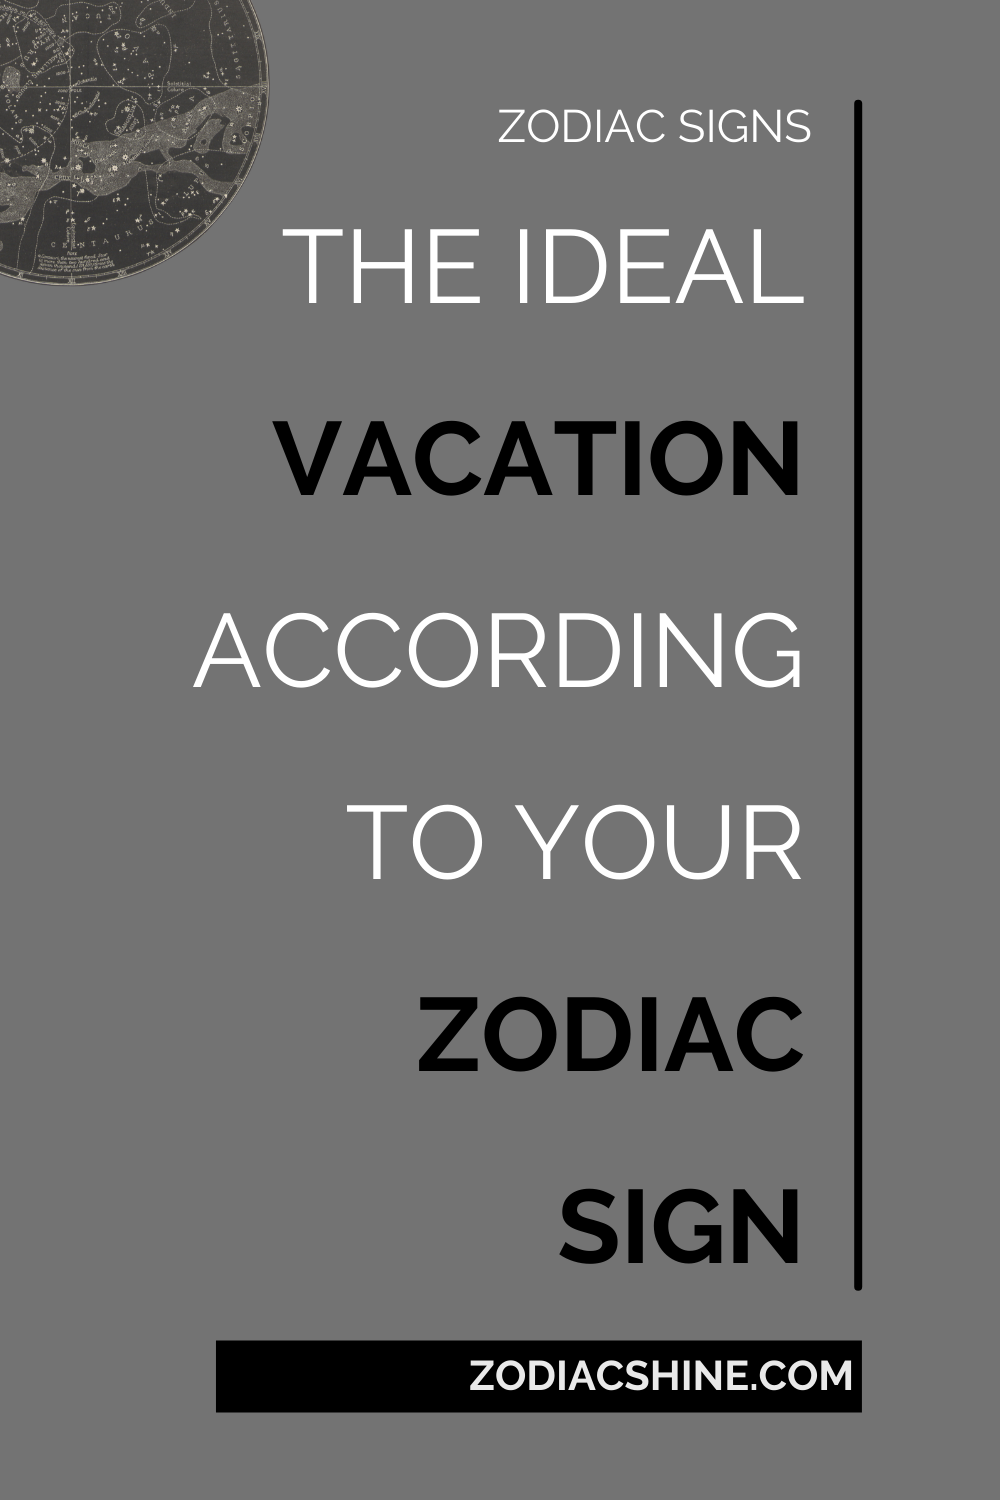 THE IDEAL VACATION ACCORDING TO YOUR ZODIAC SIGN